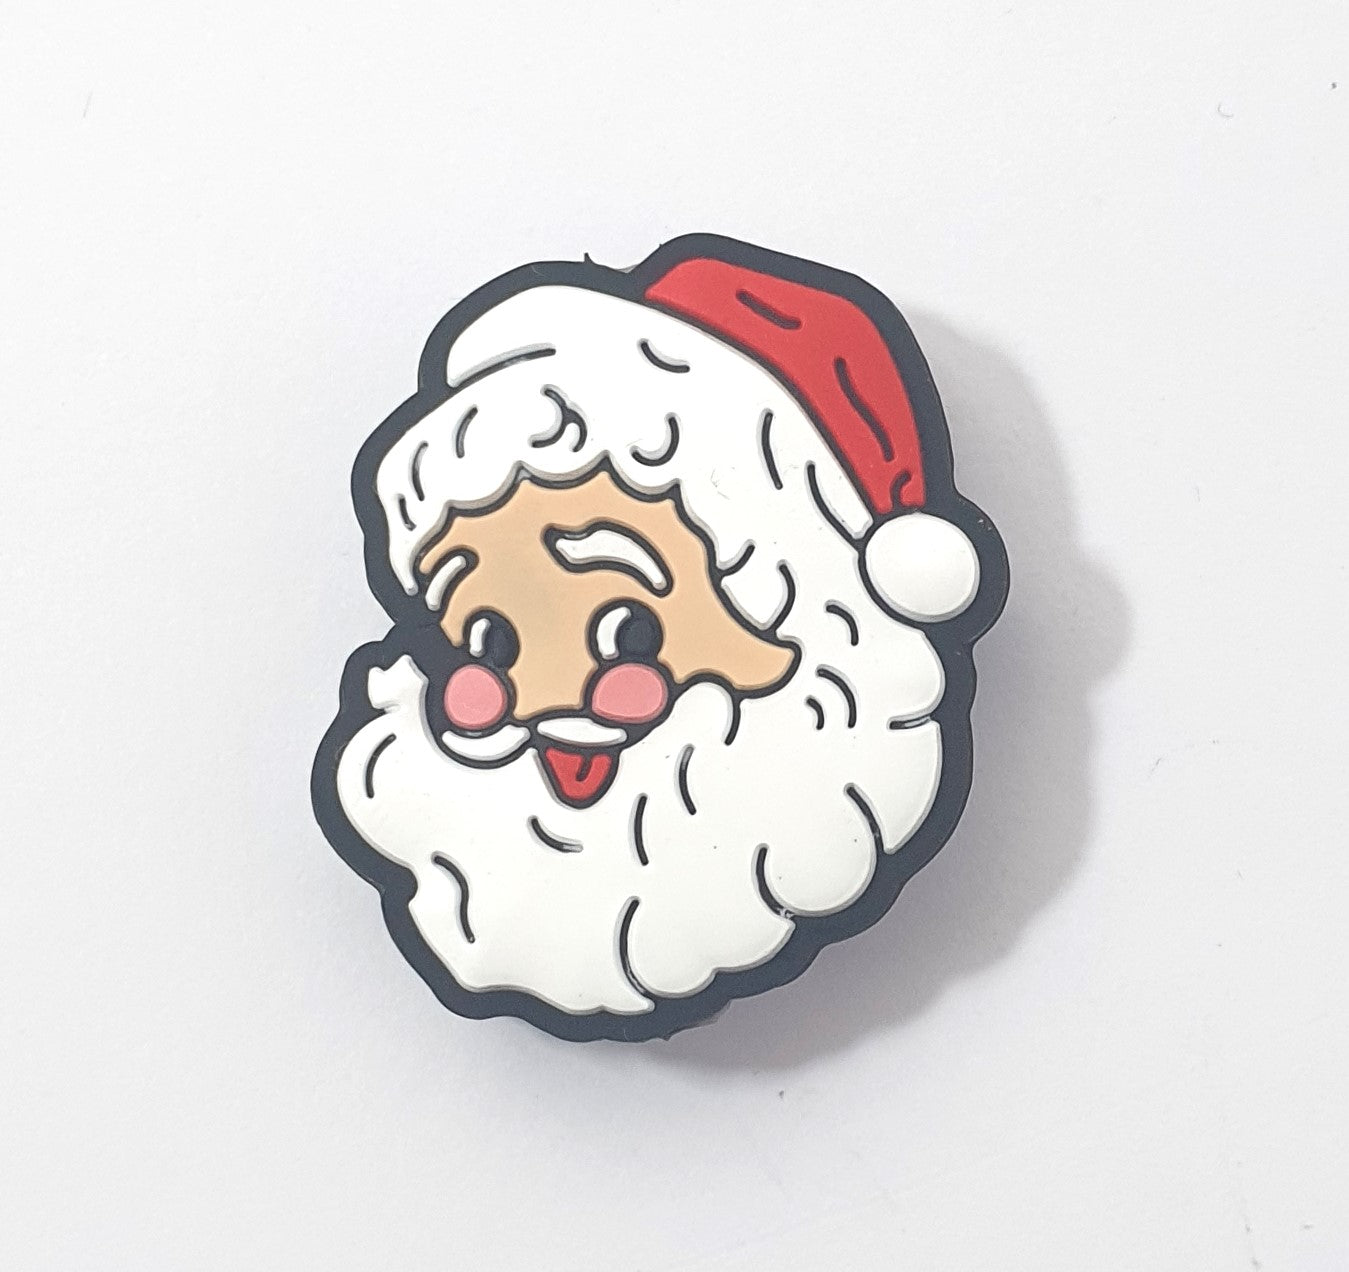 Santa. Focal Silicone bead. Can fit on pen.